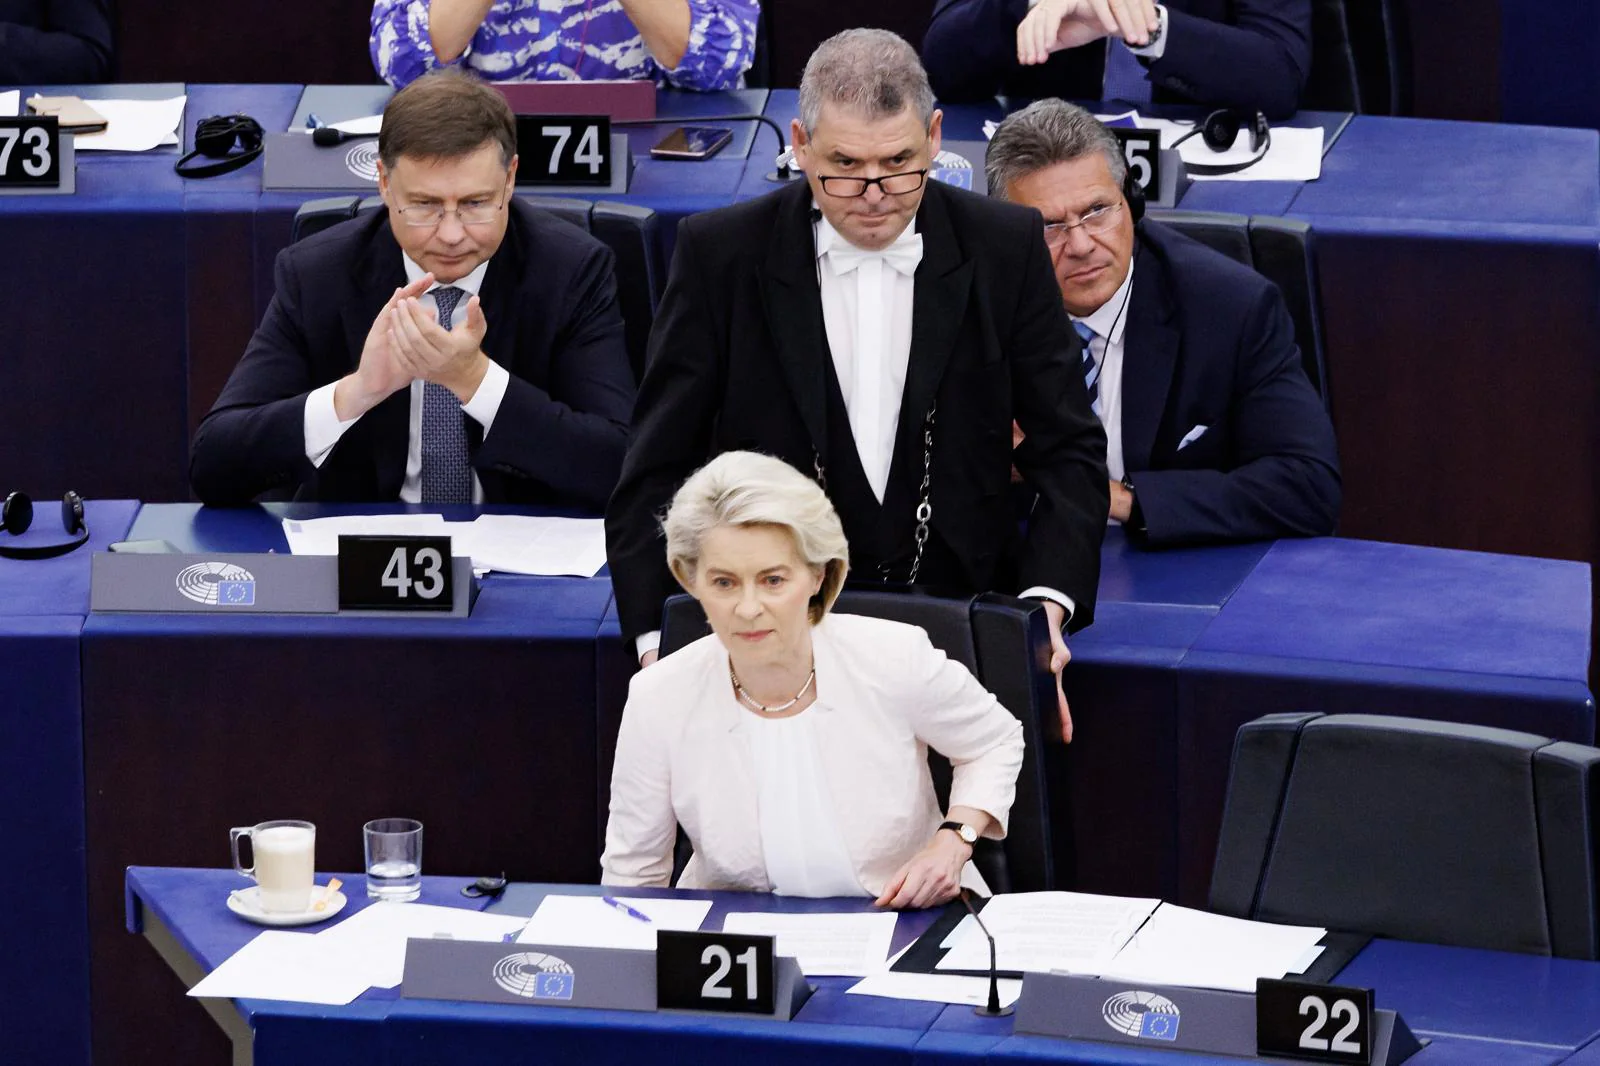 Von der Leyen won the vote in the European Parliament and will remain President of the European Commission